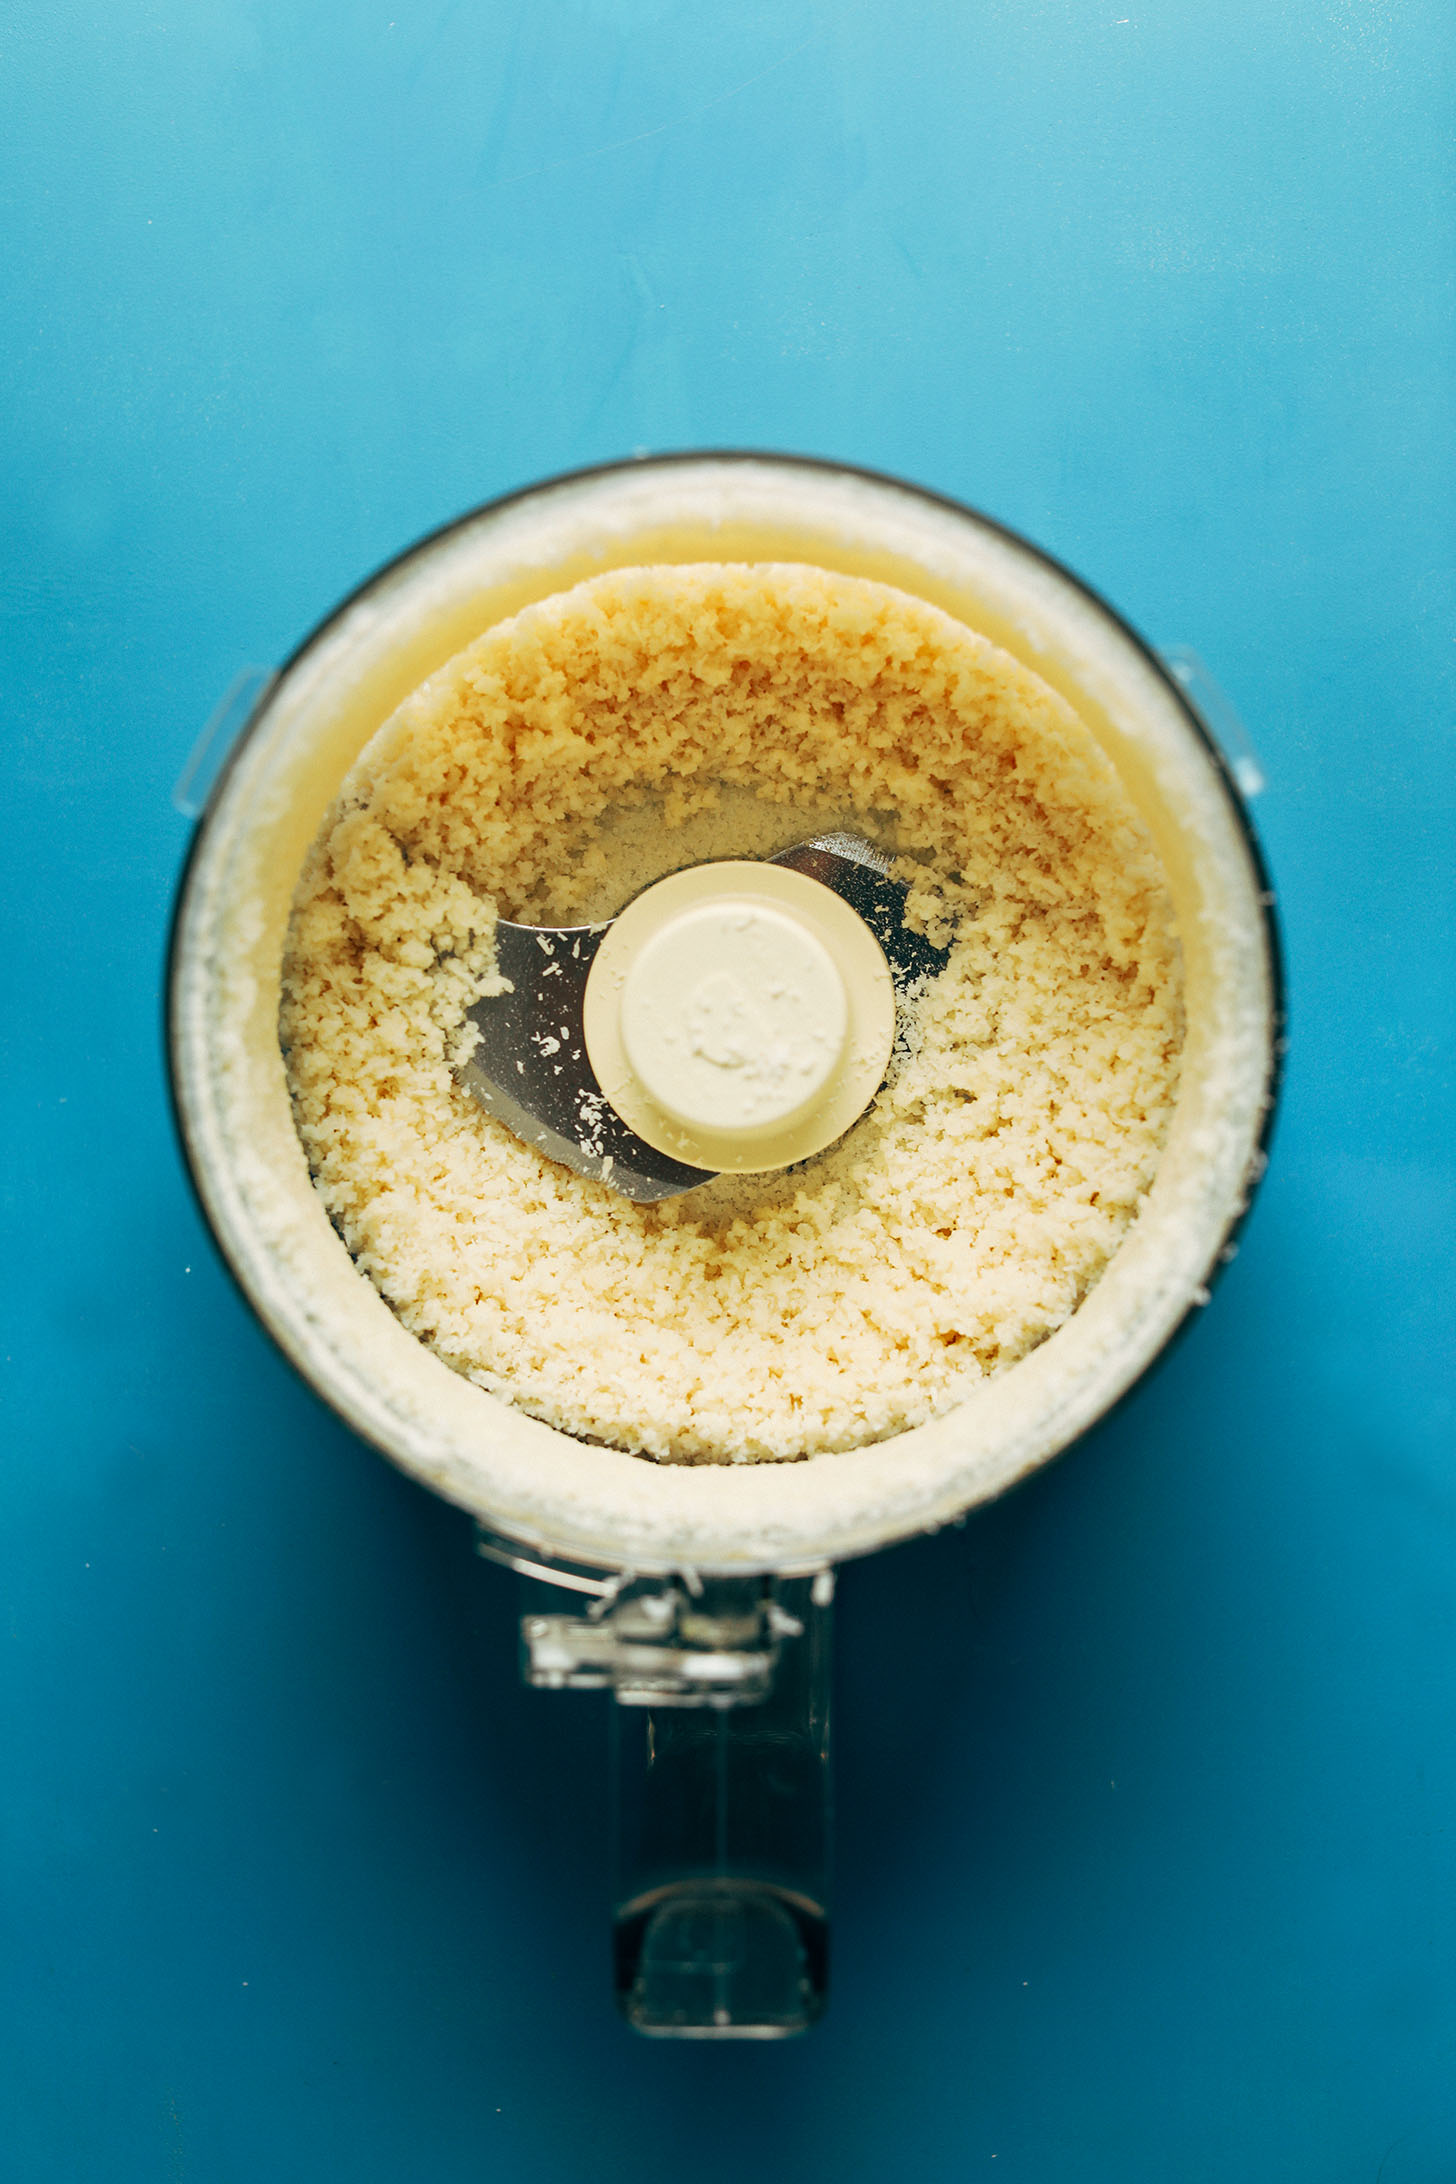 Food processor with a batch of partially-made coconut butter